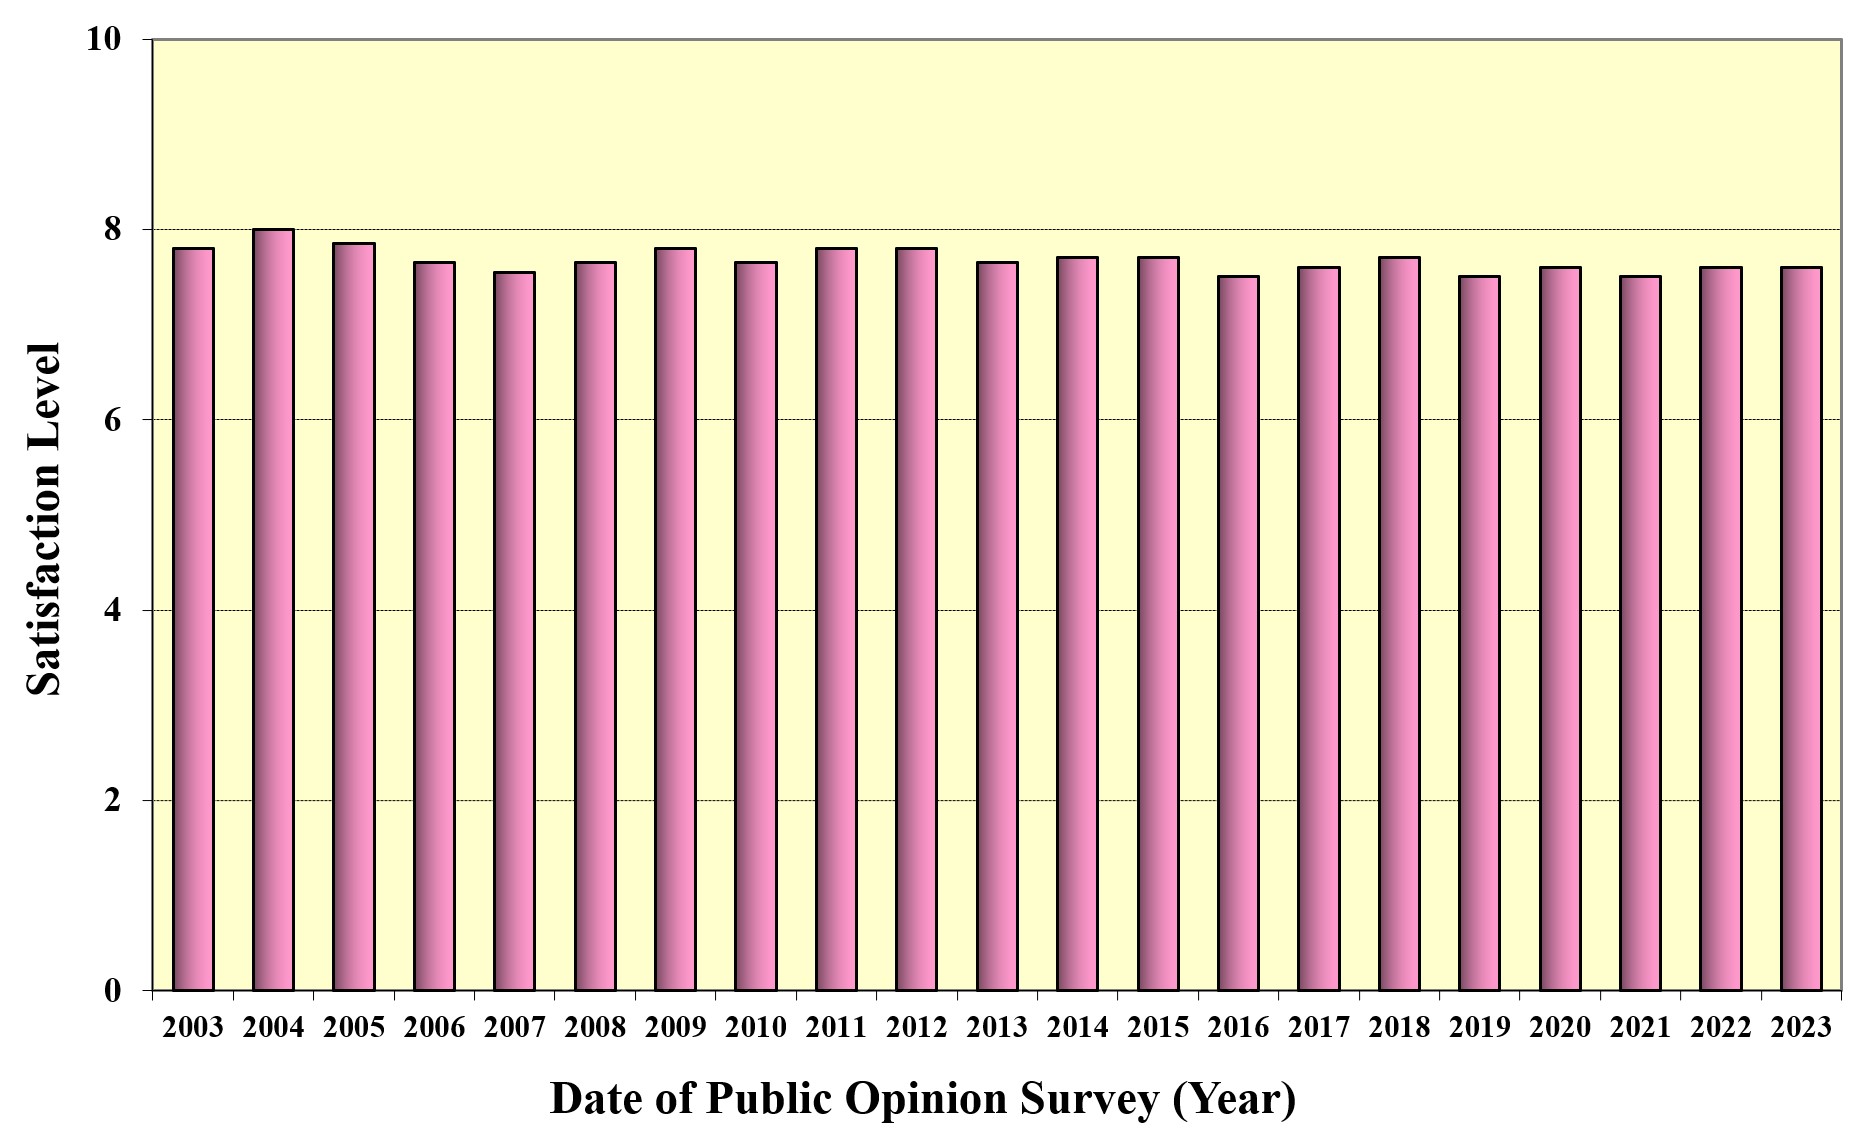 The public's satisfaction level with the overall services of the Observatory